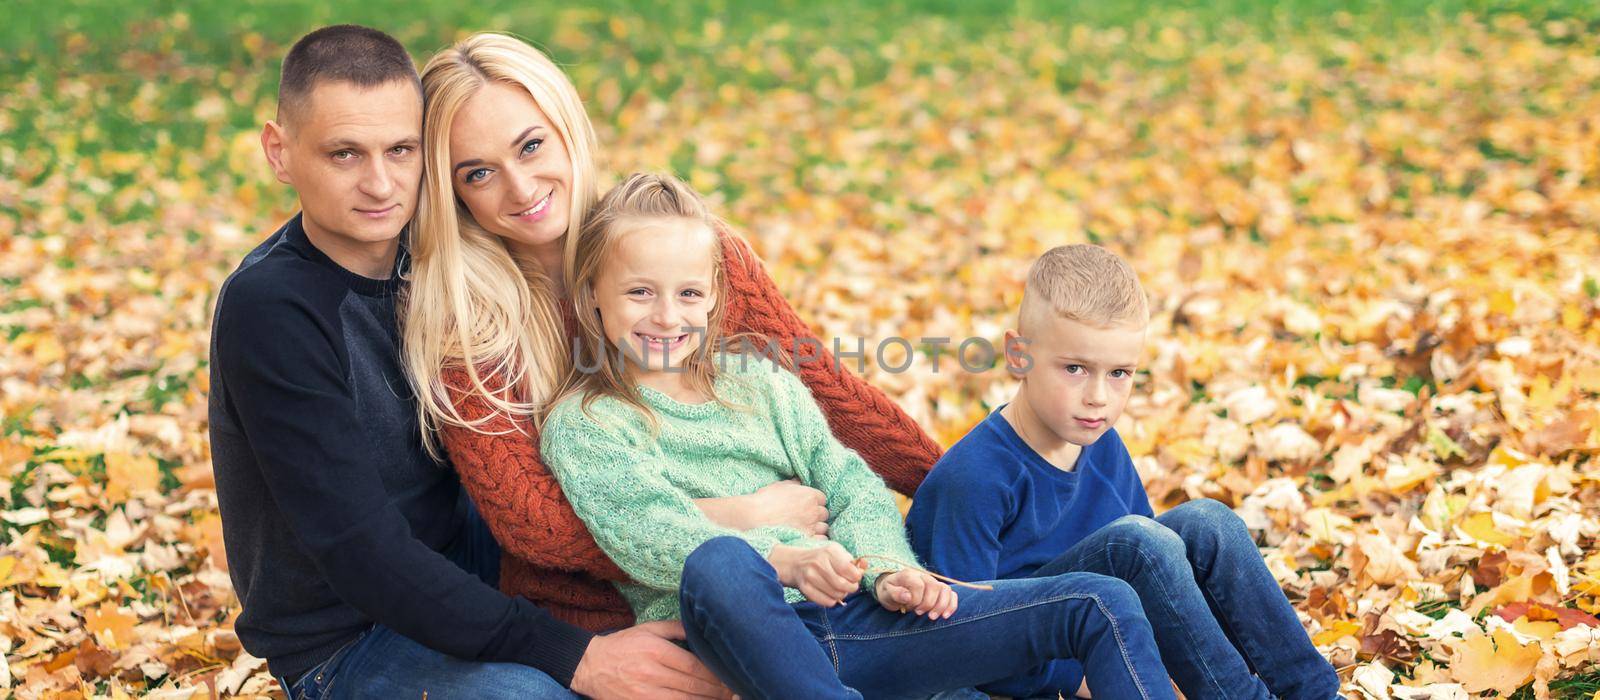 Portrait of young family sitting in autumn leaves by okskukuruza